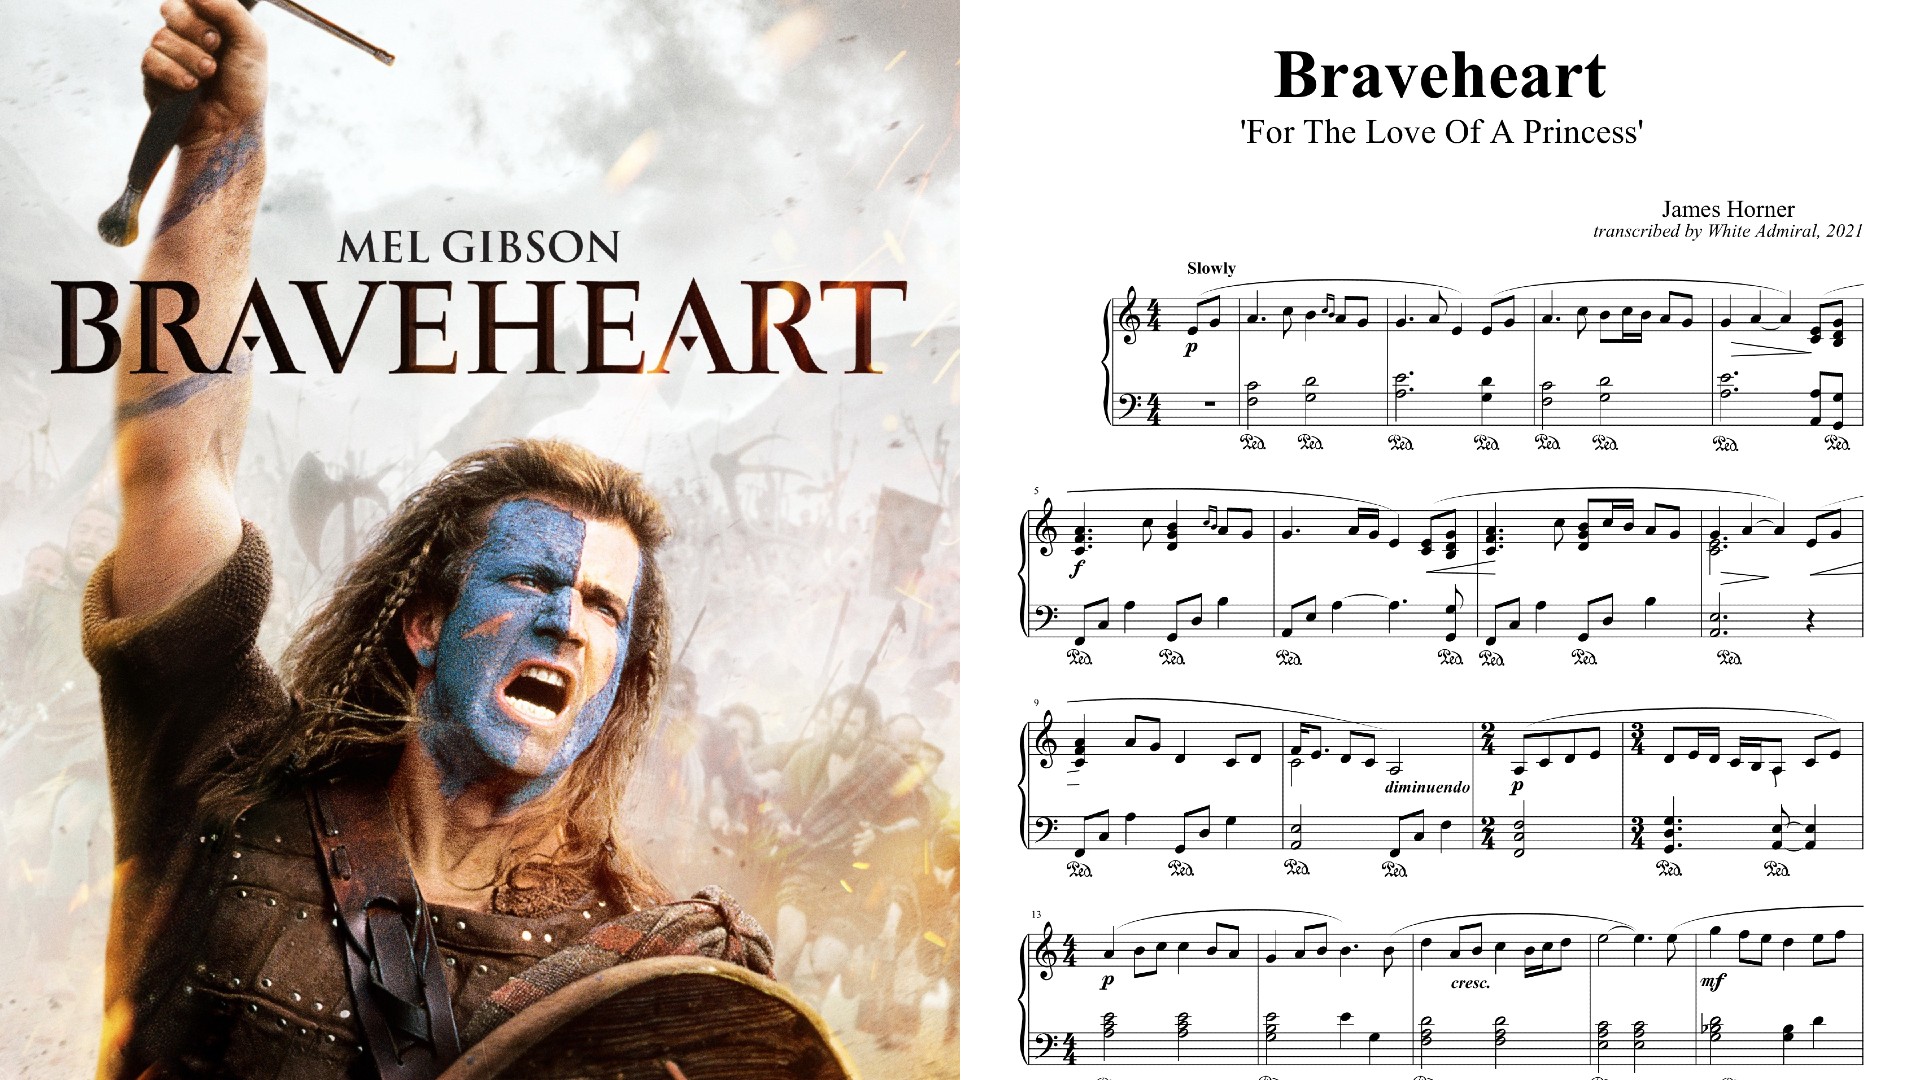 Braveheart (For The Love Of A Princess).jpg